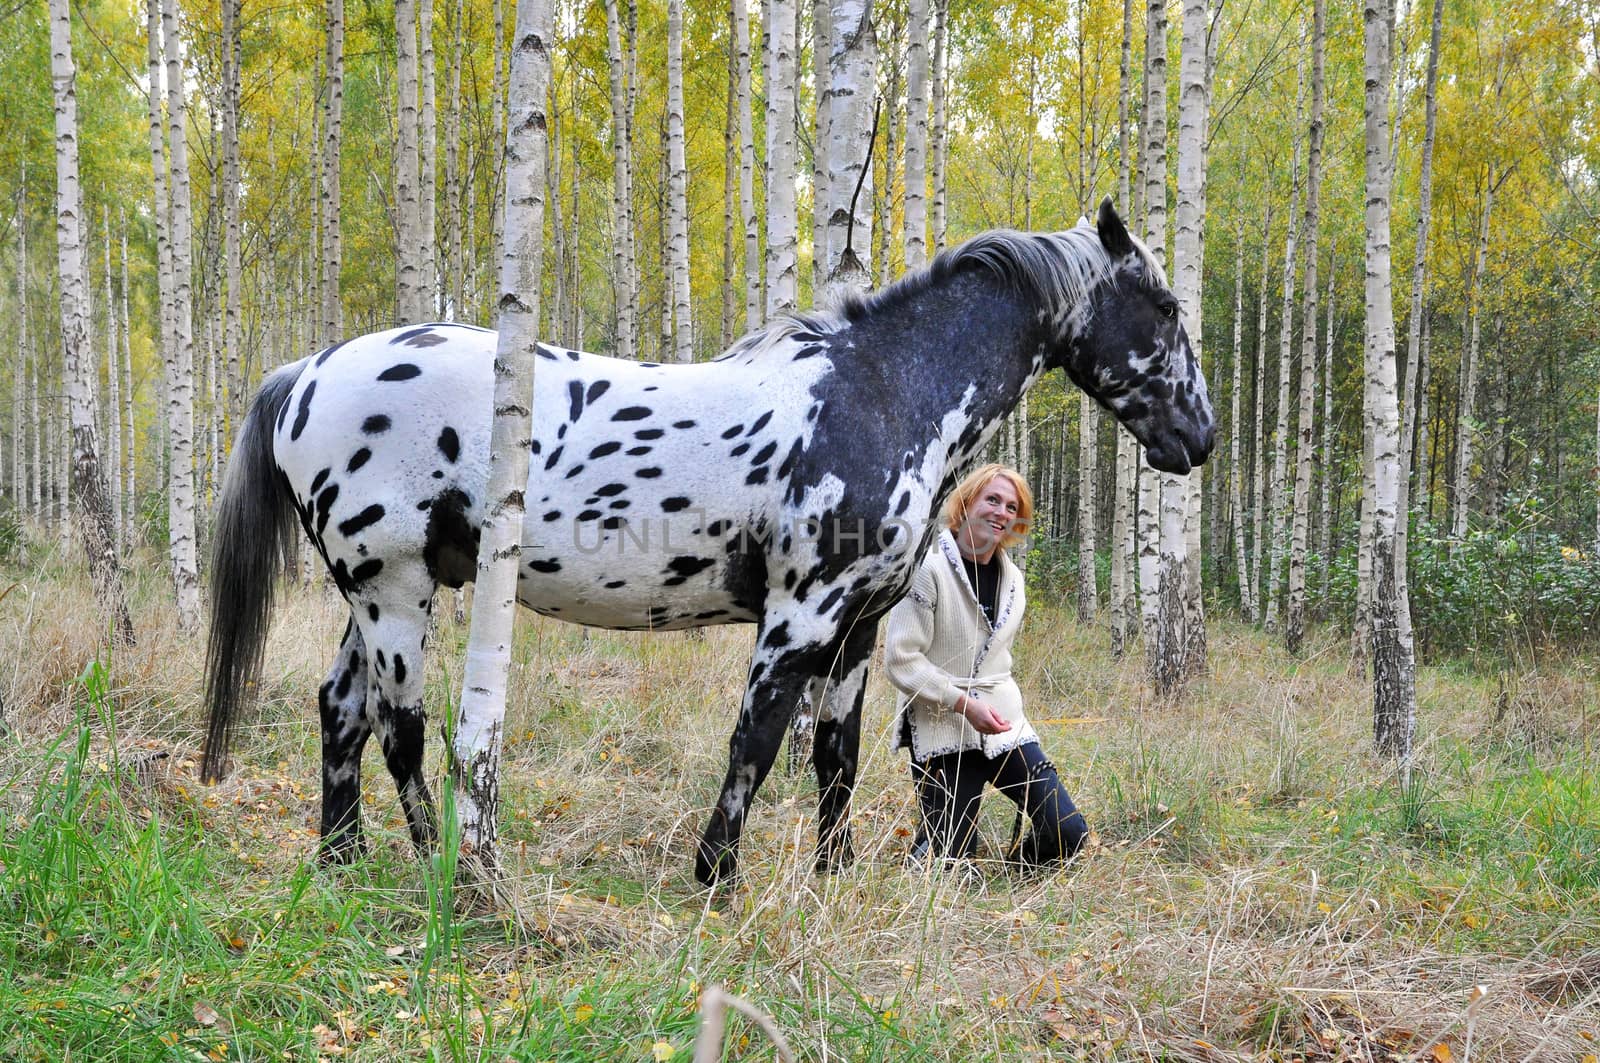 Woman and white horse with black spots in a birch forest.